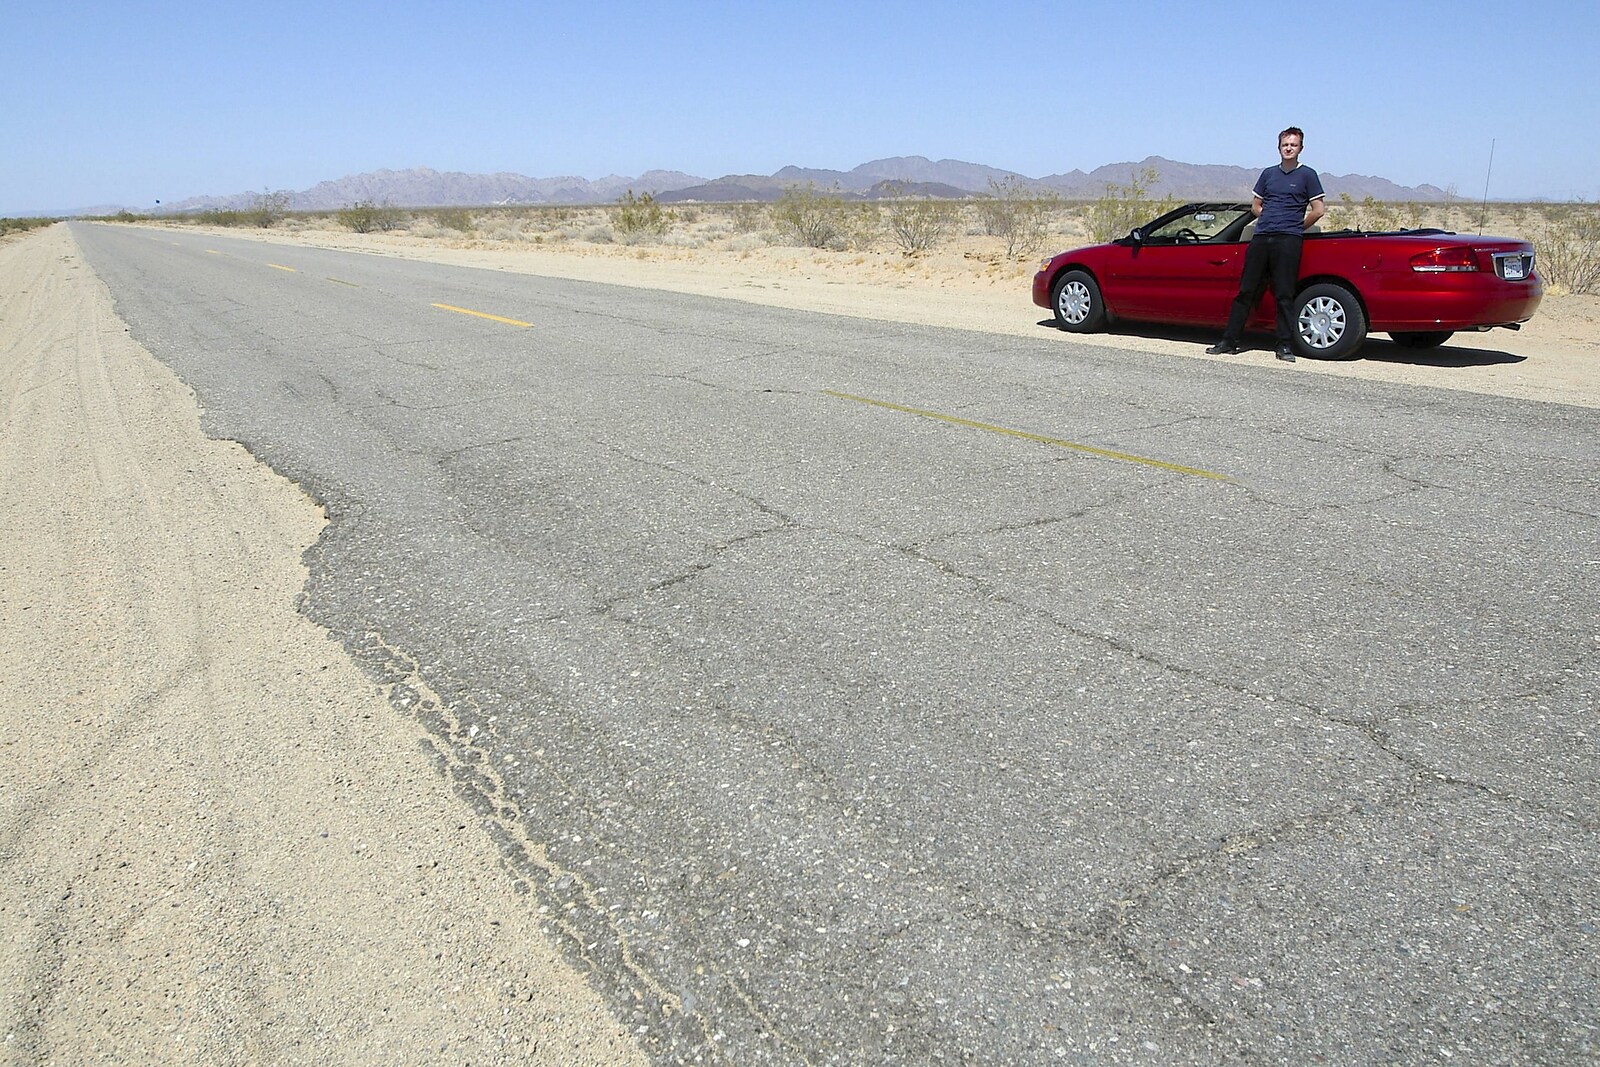 Nosher and the Chrysler Sebring pause on S34 from San Diego Seven: The Desert and the Dunes, Arizona and California, US - 22nd April